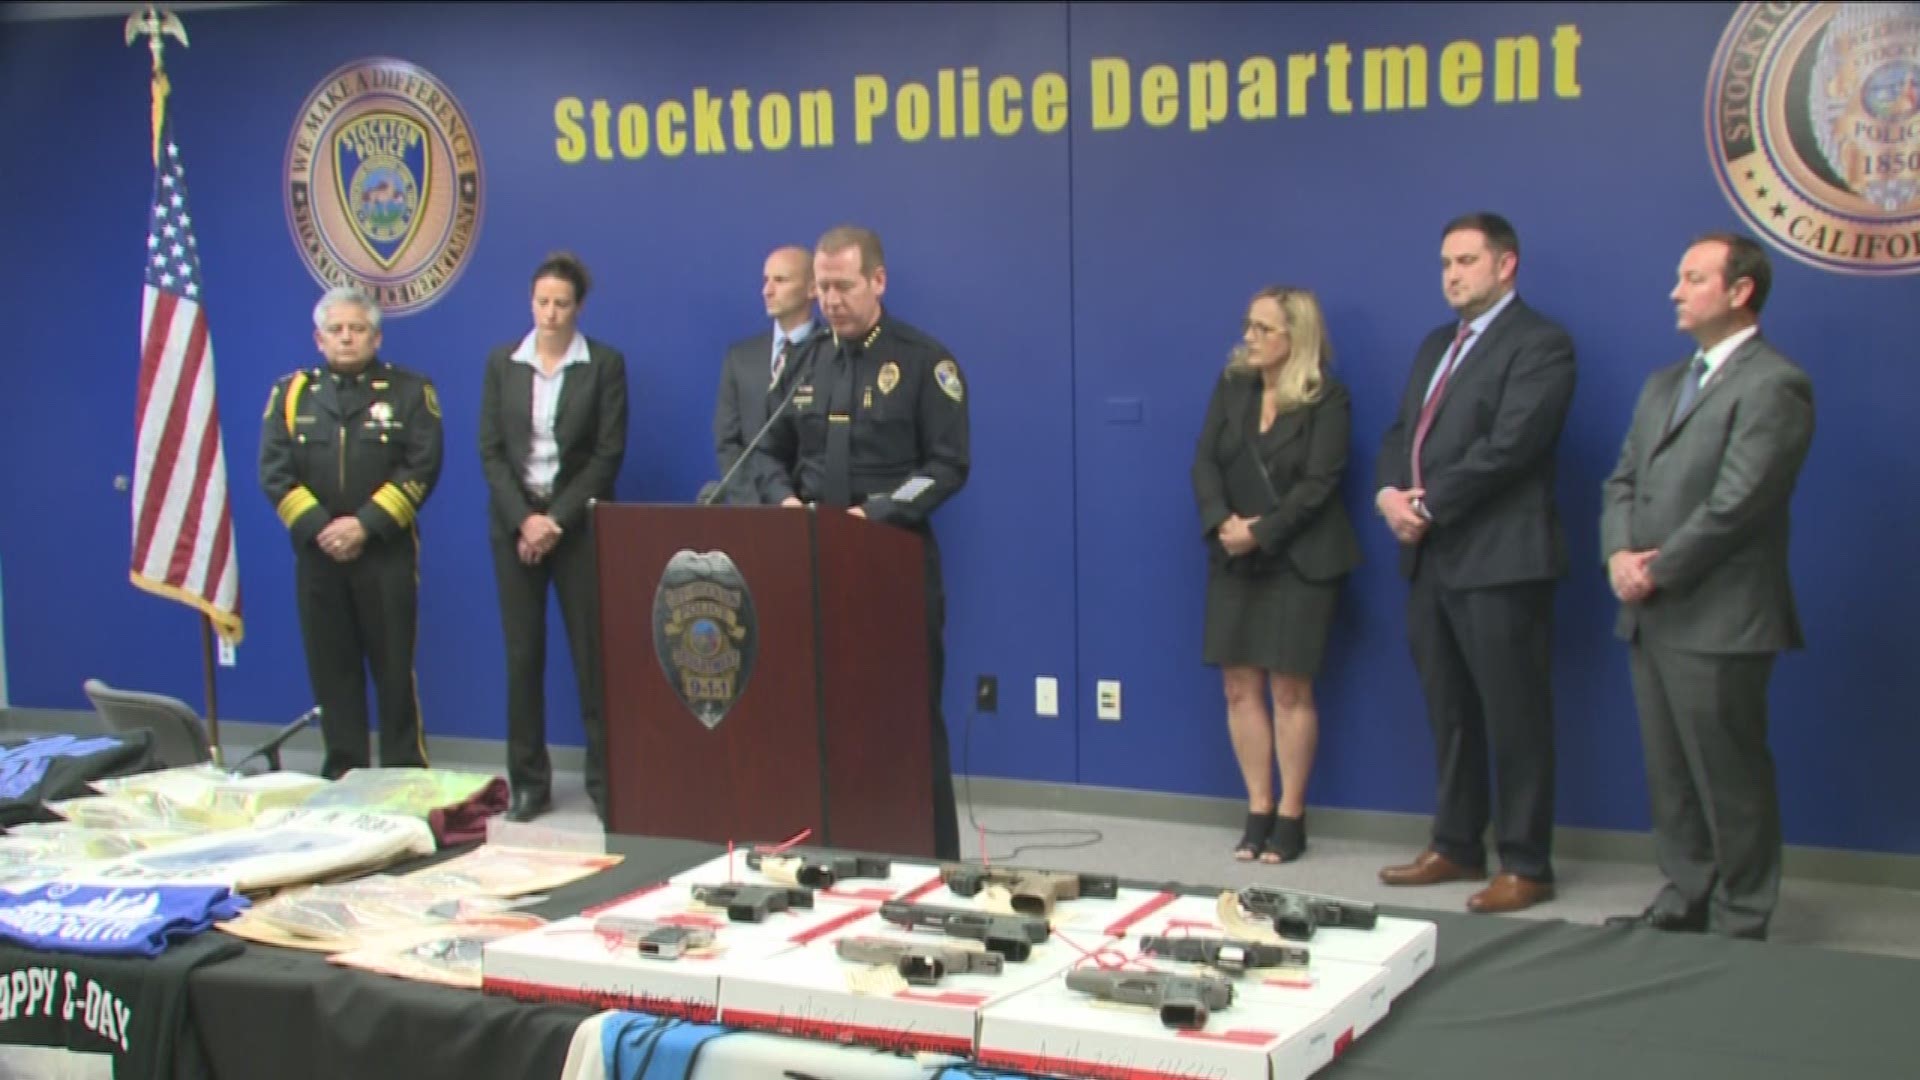 A total of 23 people, including one correctional officer, were arrested Wednesday following a lengthy, multi-agency gang investigation in the Stockton and Reno areas, according to the Stockton Police Department. (April 13, 2017)